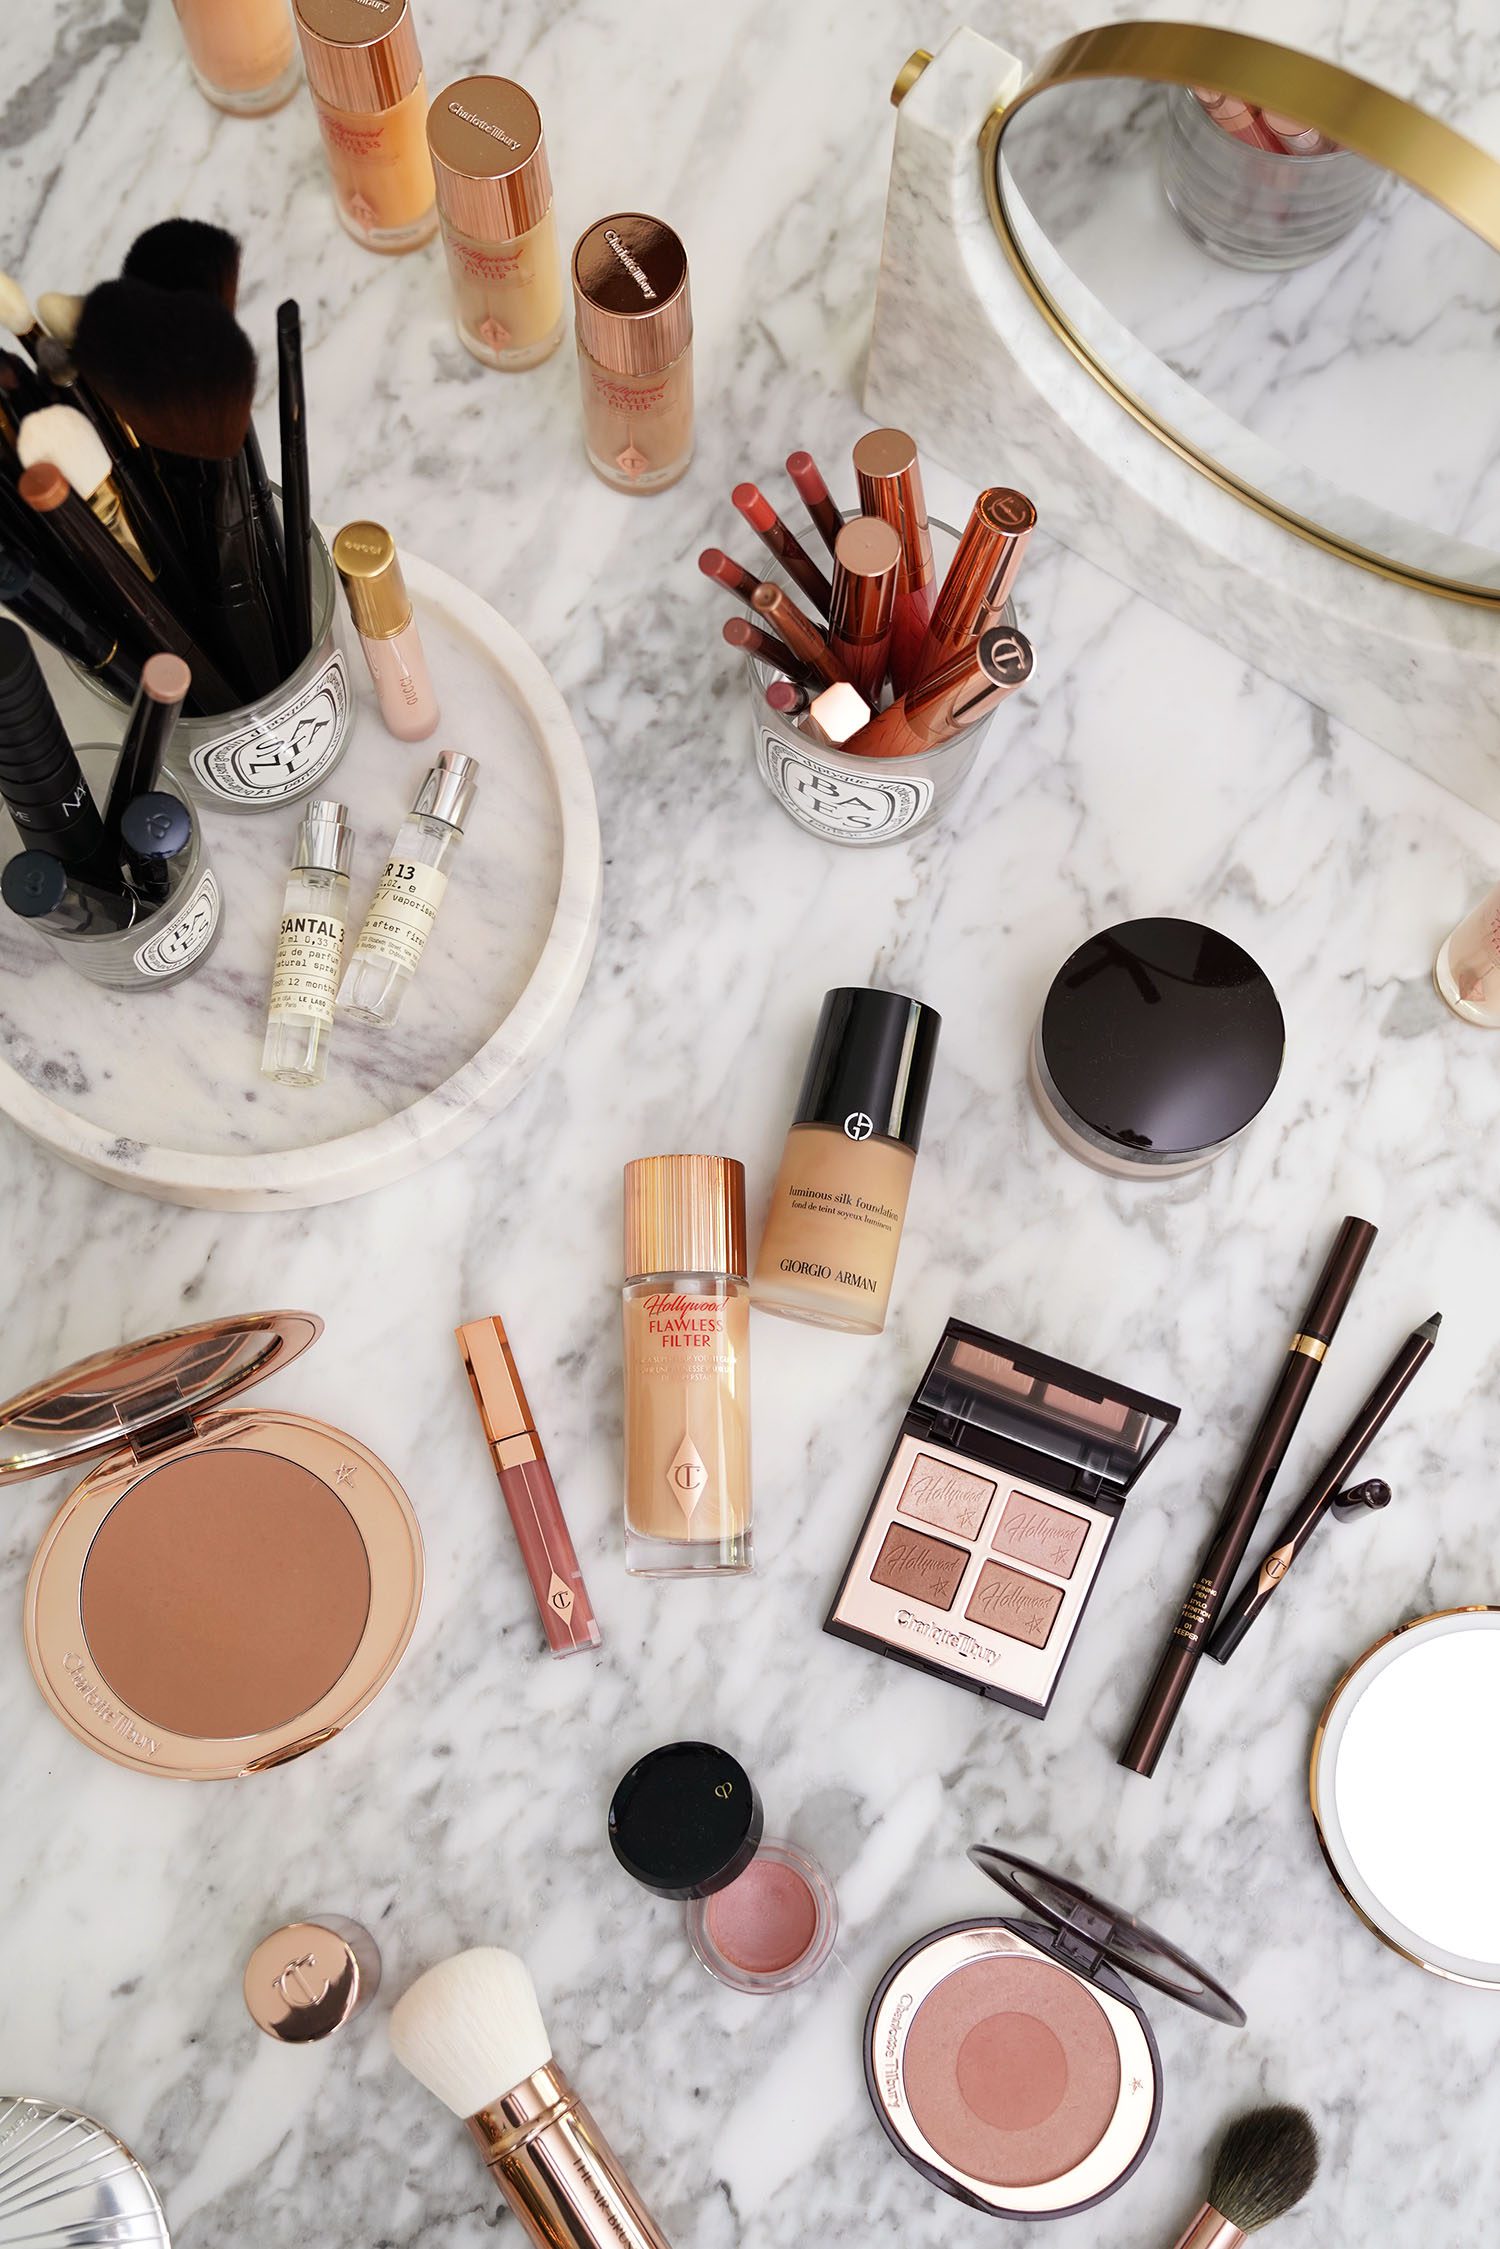 Glowing Makeup Look I'm Loving Right Now - The Beauty Look Book